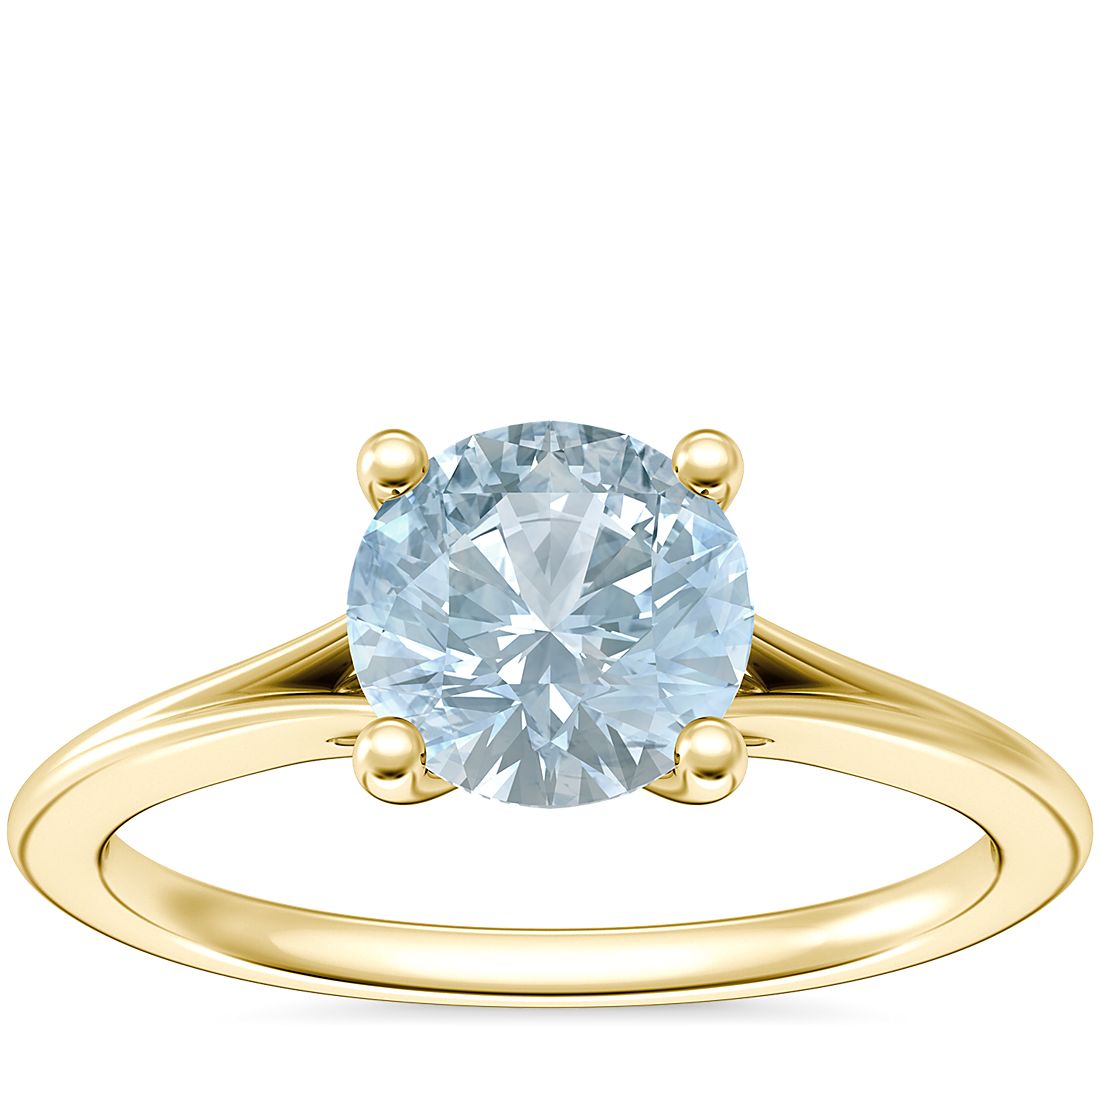 Petite Split Shank Solitaire Engagement Ring with Round Aquamarine in 18k Yellow Gold (6.5mm)